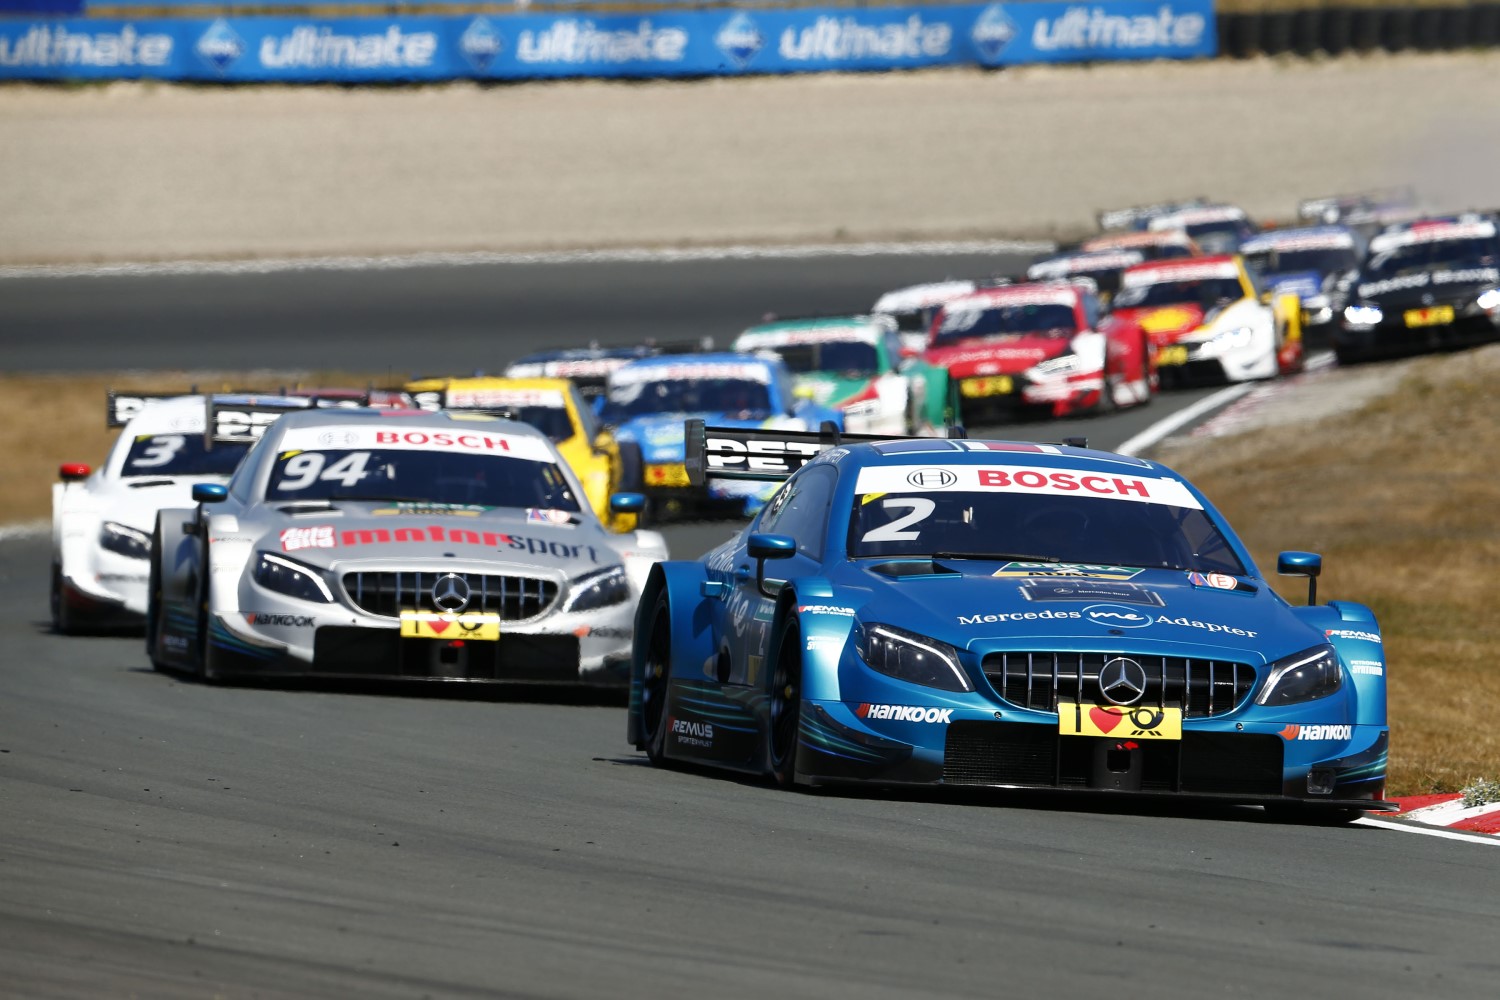 Paffett leads from the start